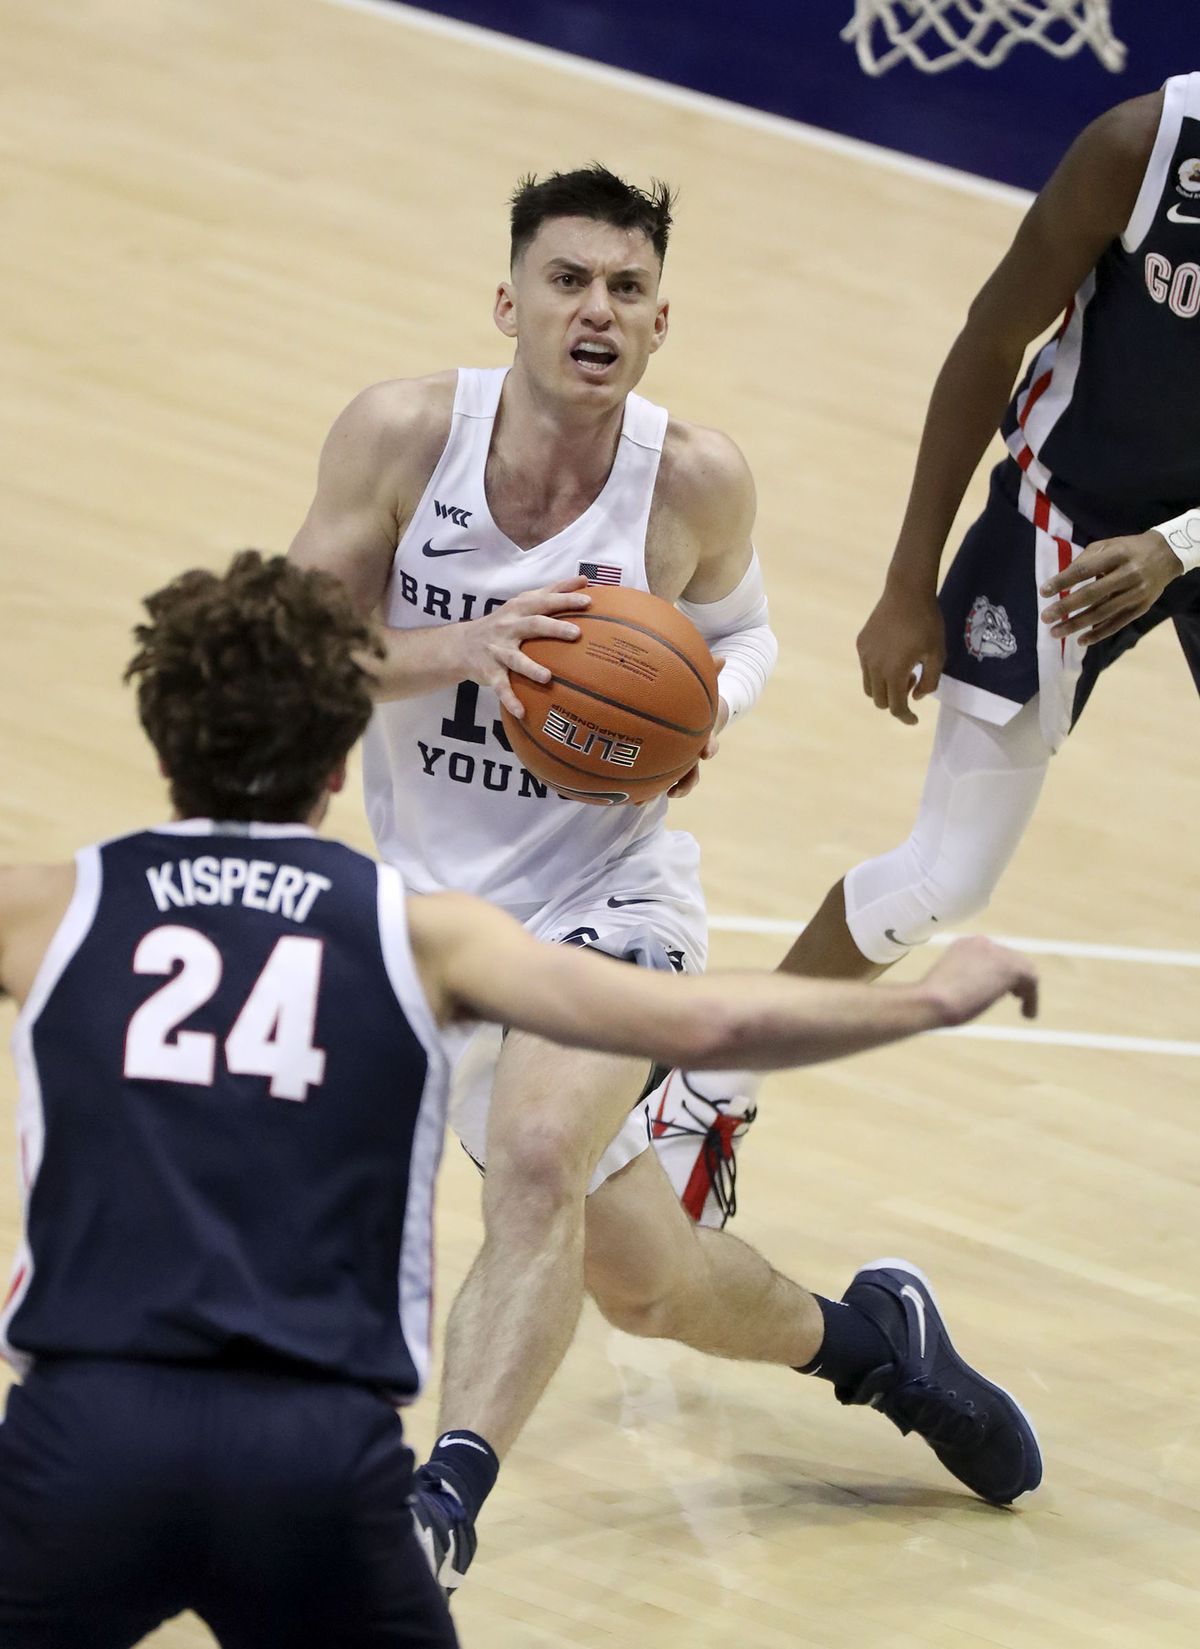 Brigham Young Cougars guard Alex Barcello (13) looks to shoot in front of Gonzaga Bulldogs forward Corey Kispert (24) during a basketball game at the Marriott Center in Provo on Monday, Feb. 8, 2021. BYU lost 71-82.